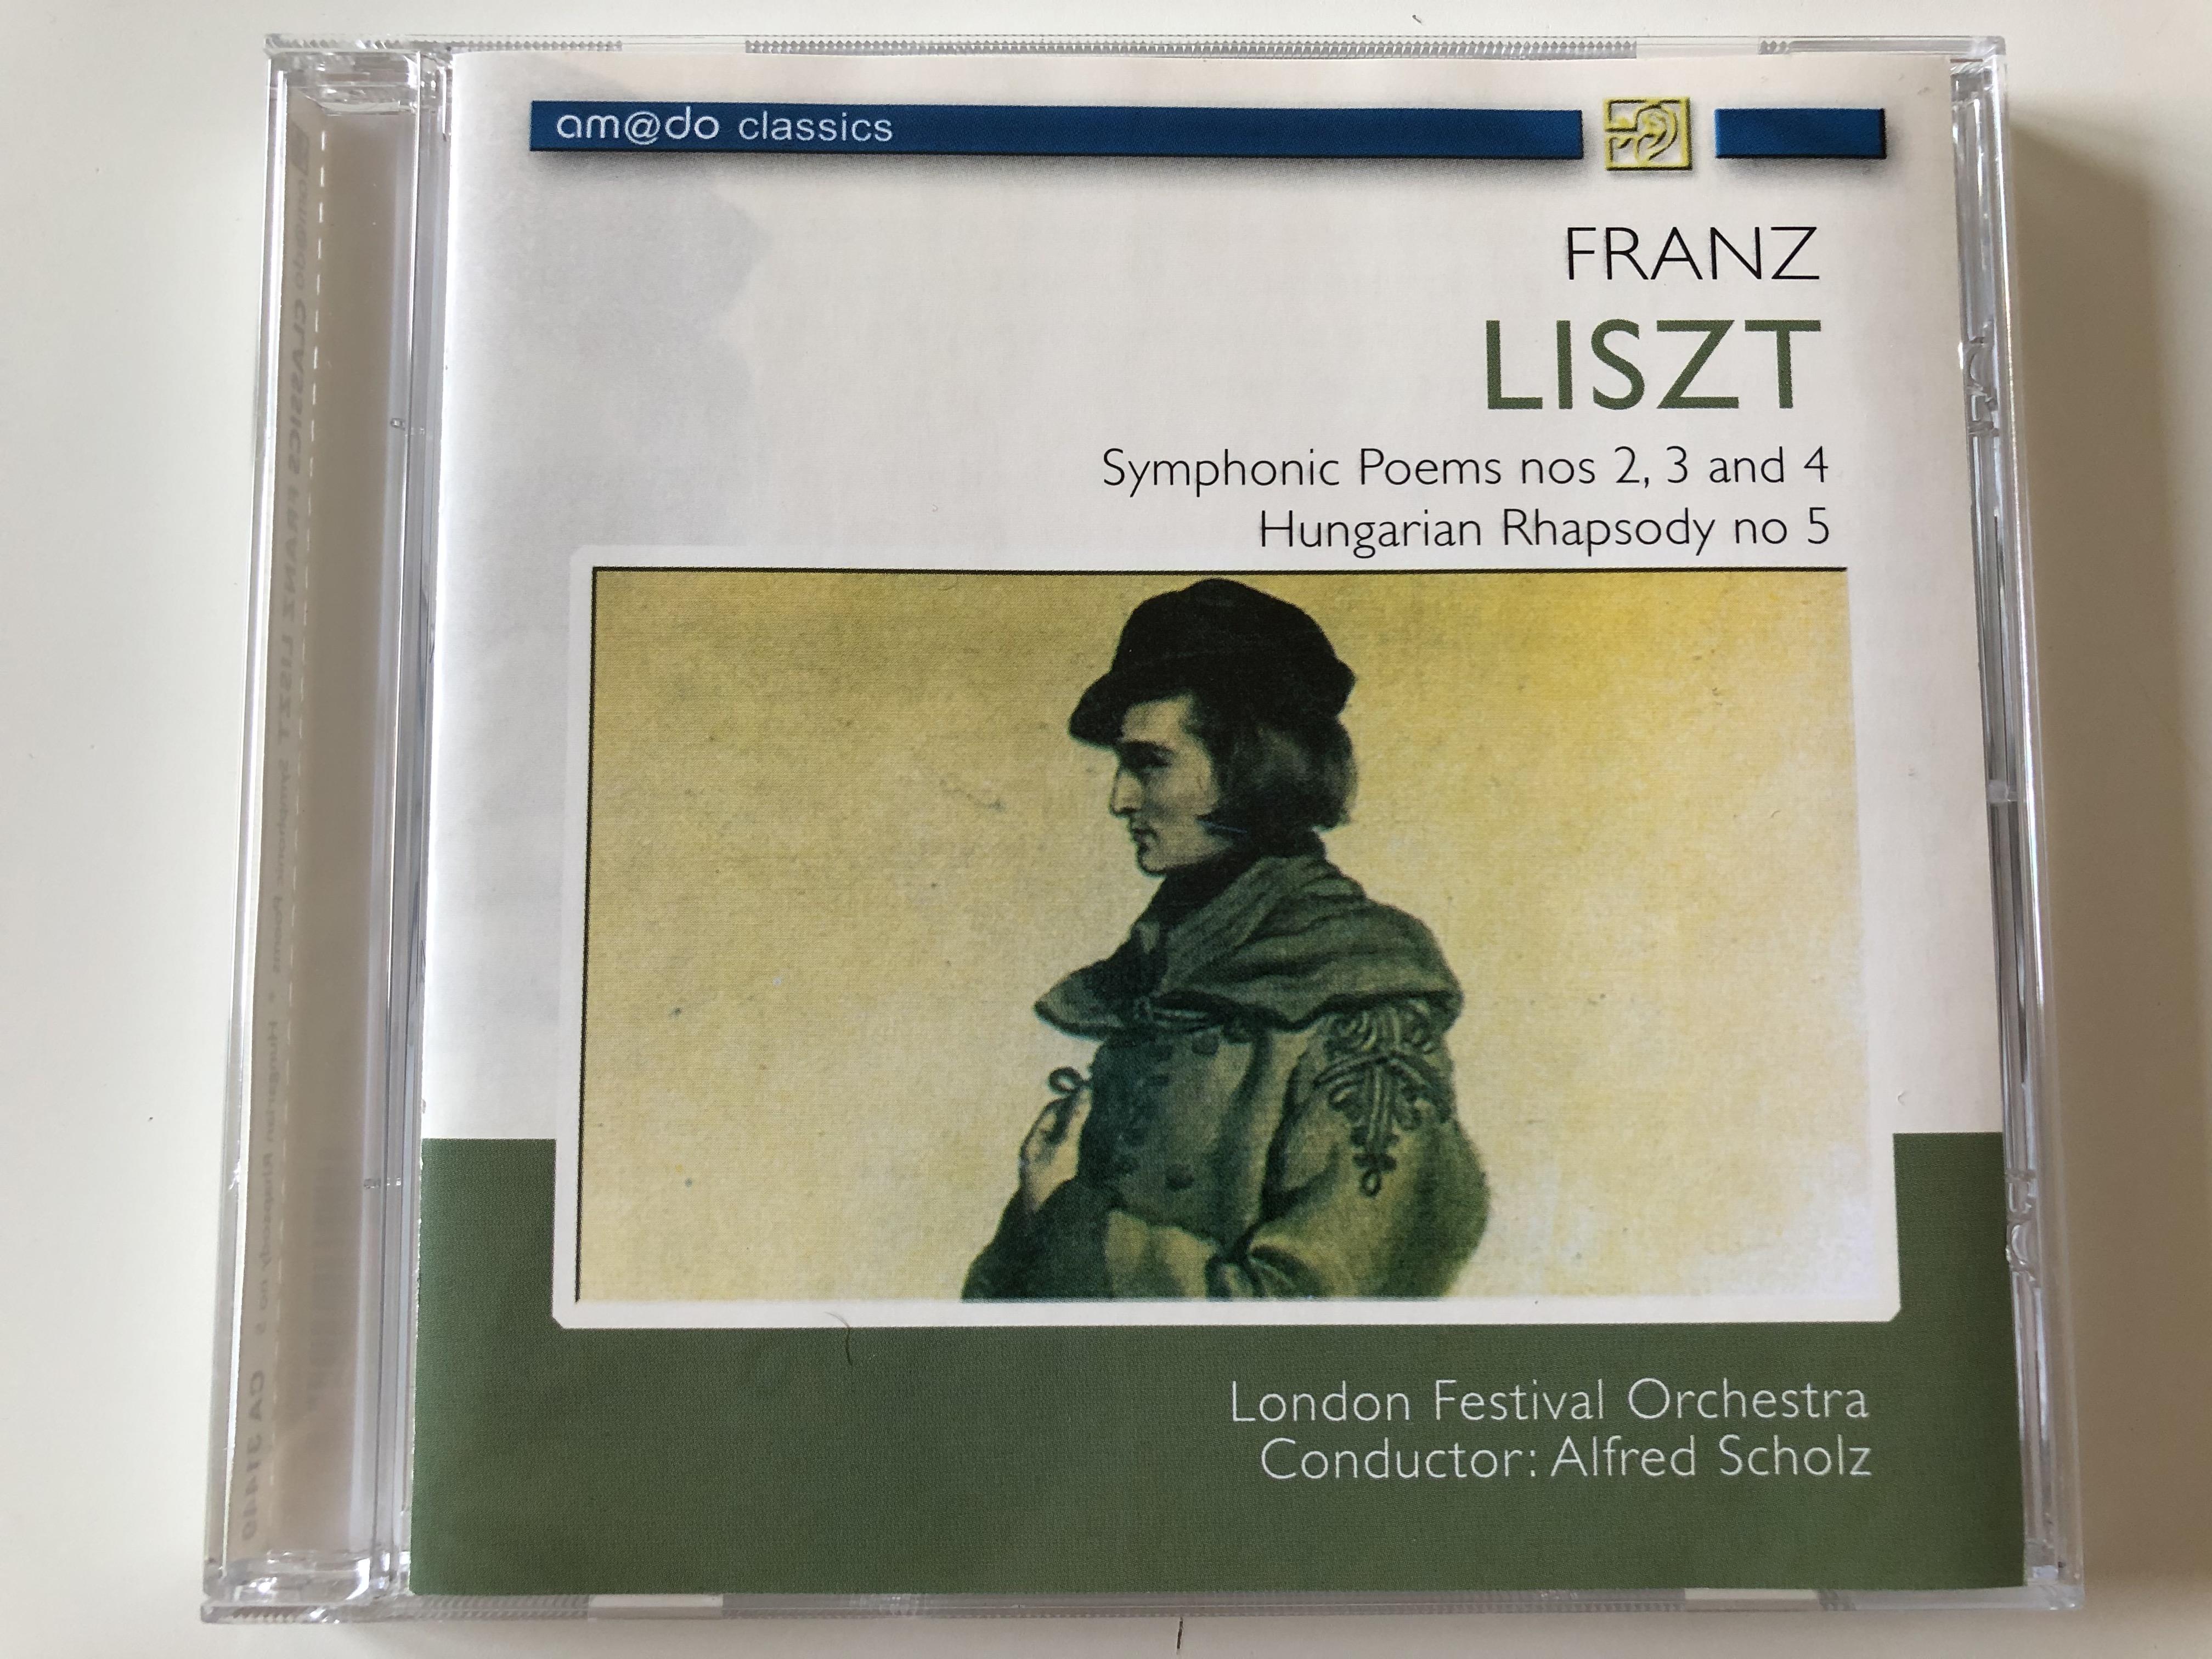 franz-liszt-symphonic-poems-nos-2-3-and-4-hungarian-rhapsody-no-5-london-festival-orchestra-conductor-alfred-scholz-amado-audio-cd-2005-31449-1-.jpg